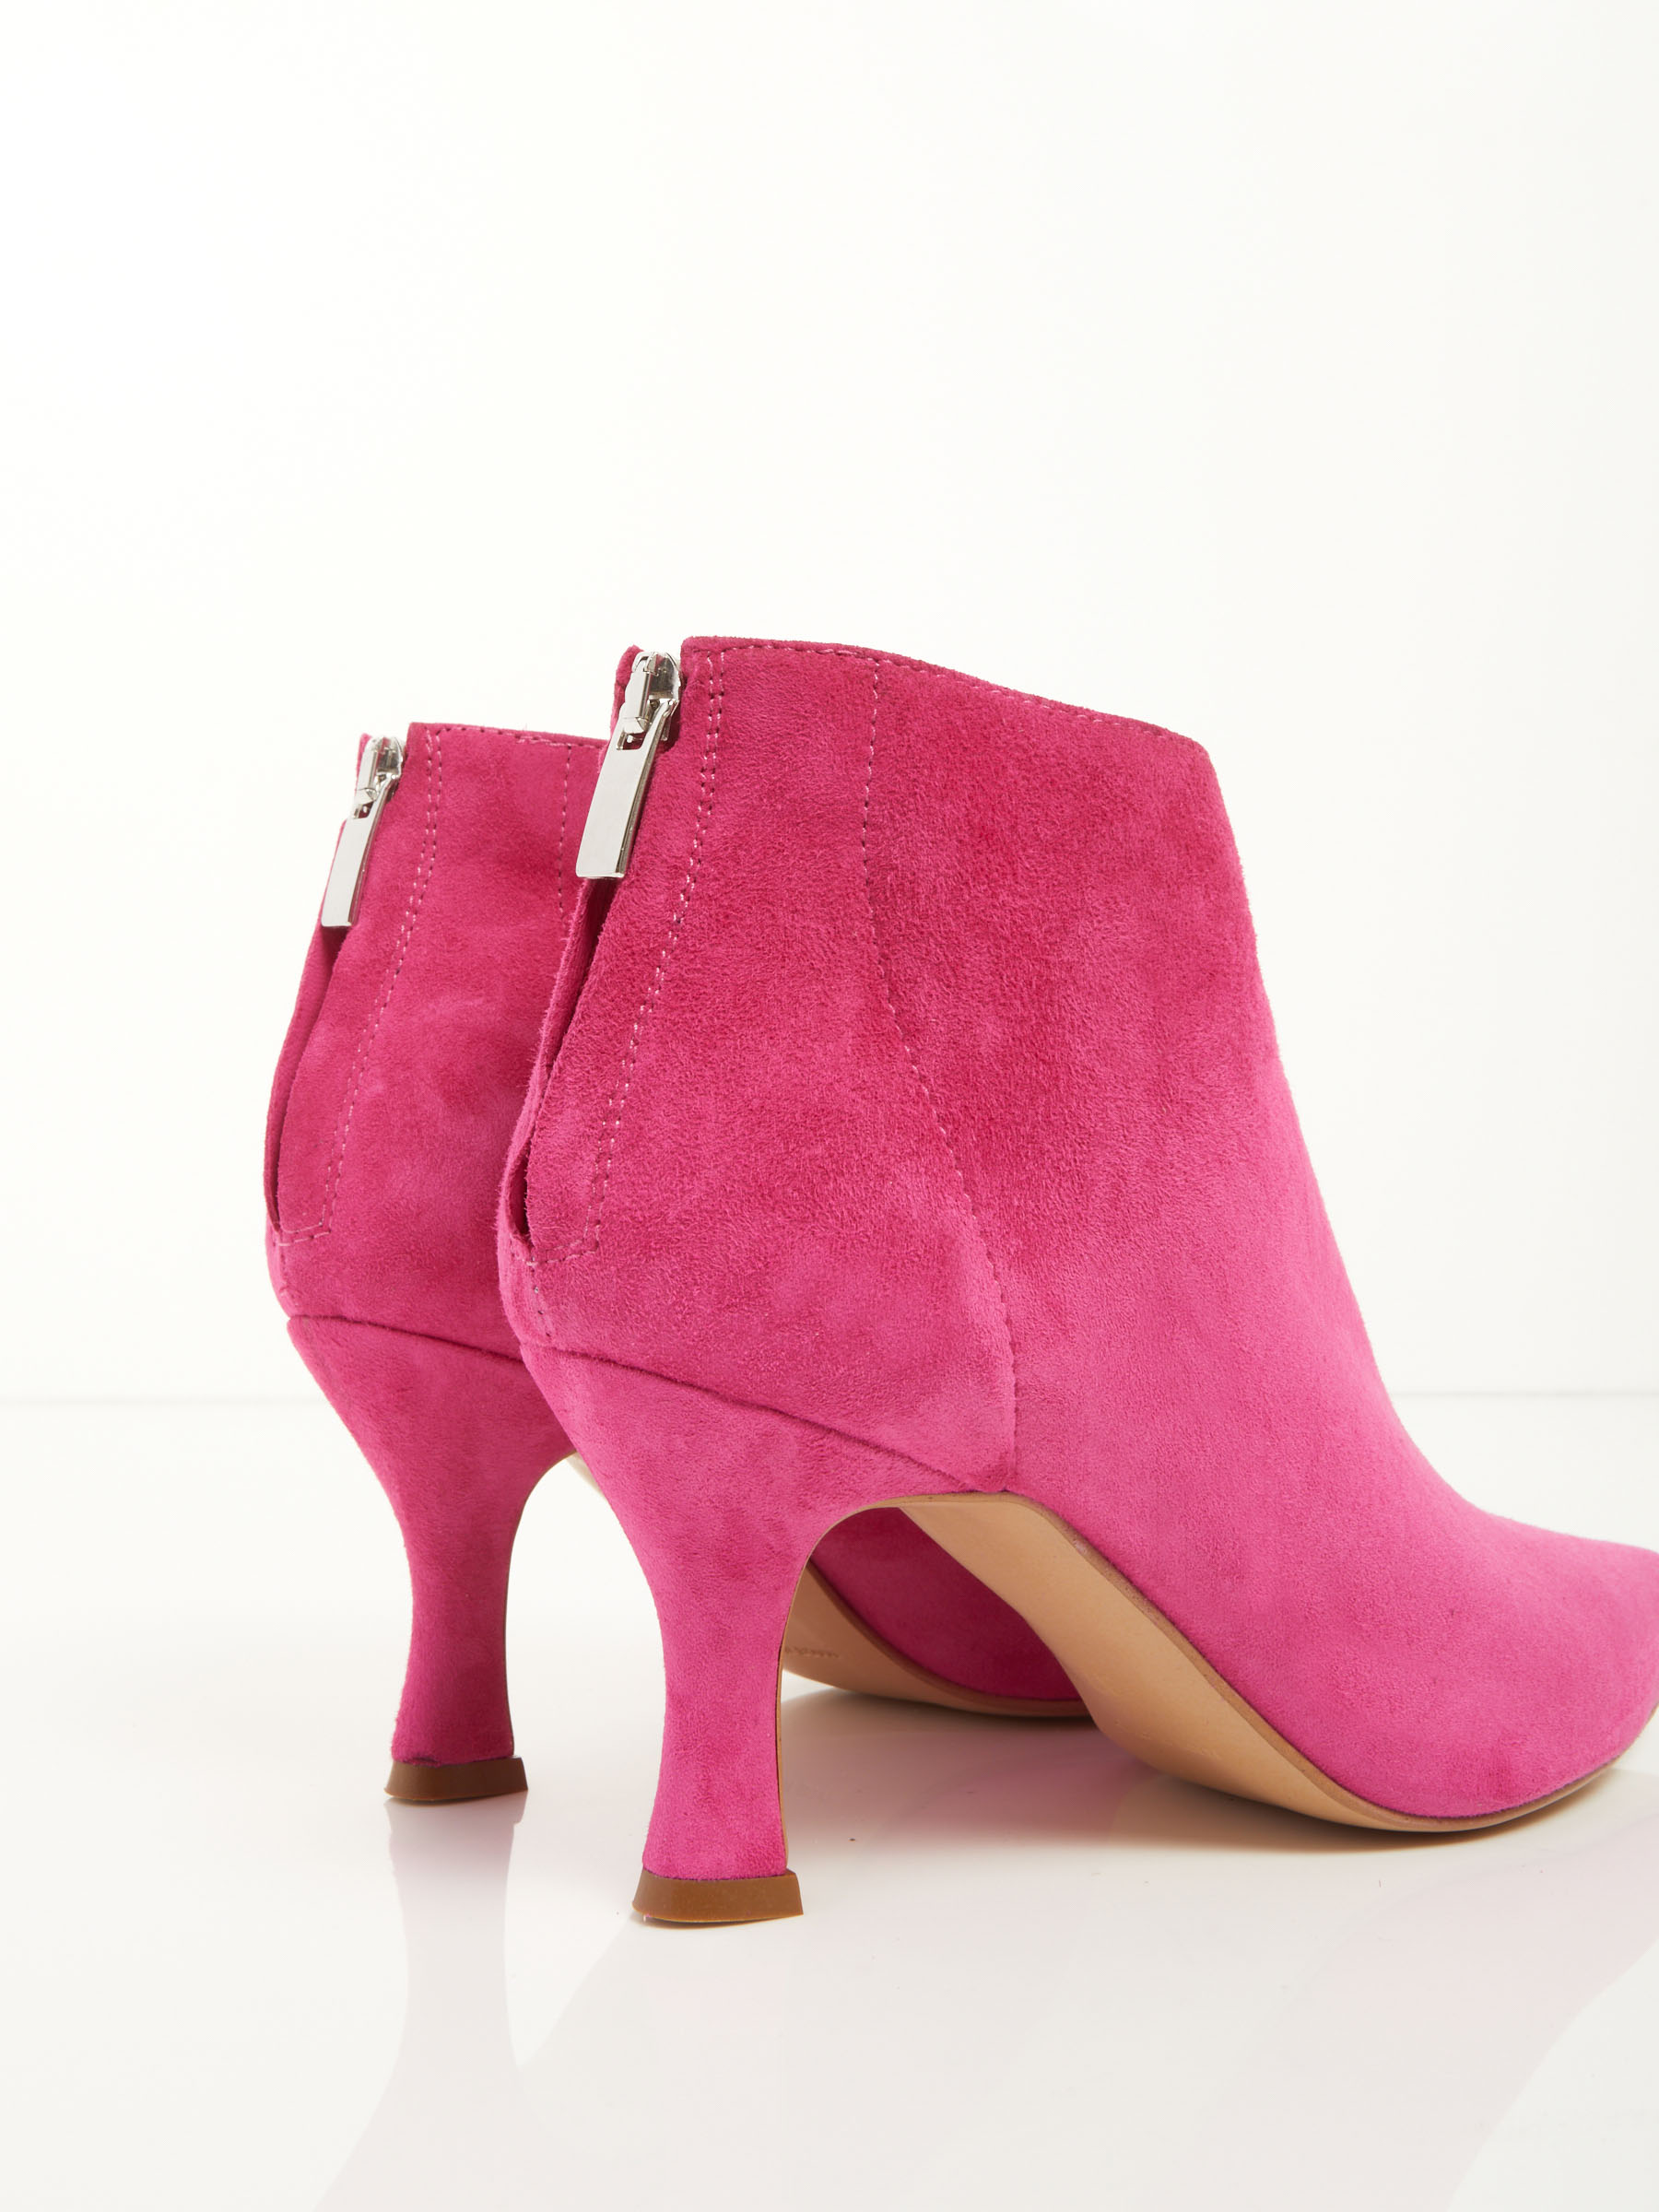 Suede Ankle Boots F0545554-0413 scarpe ovye